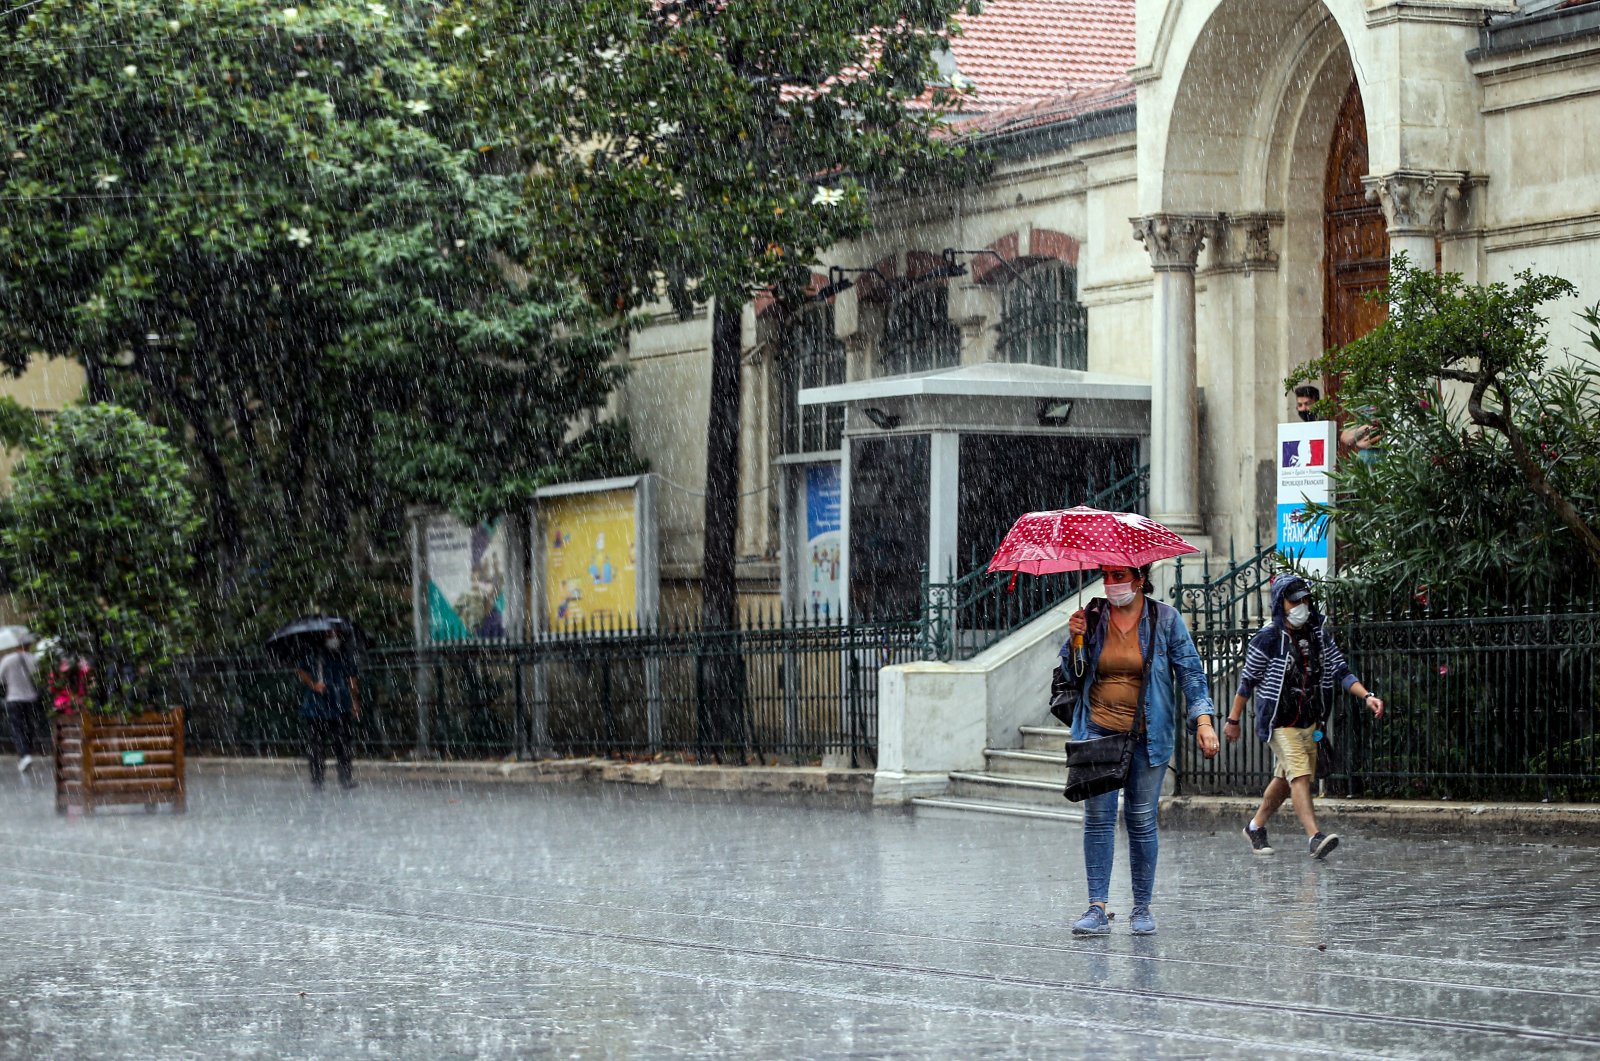 People weather a downpour in Taksim Square, Istanbul, Turkey, June 23, 2020. (AA Photo)